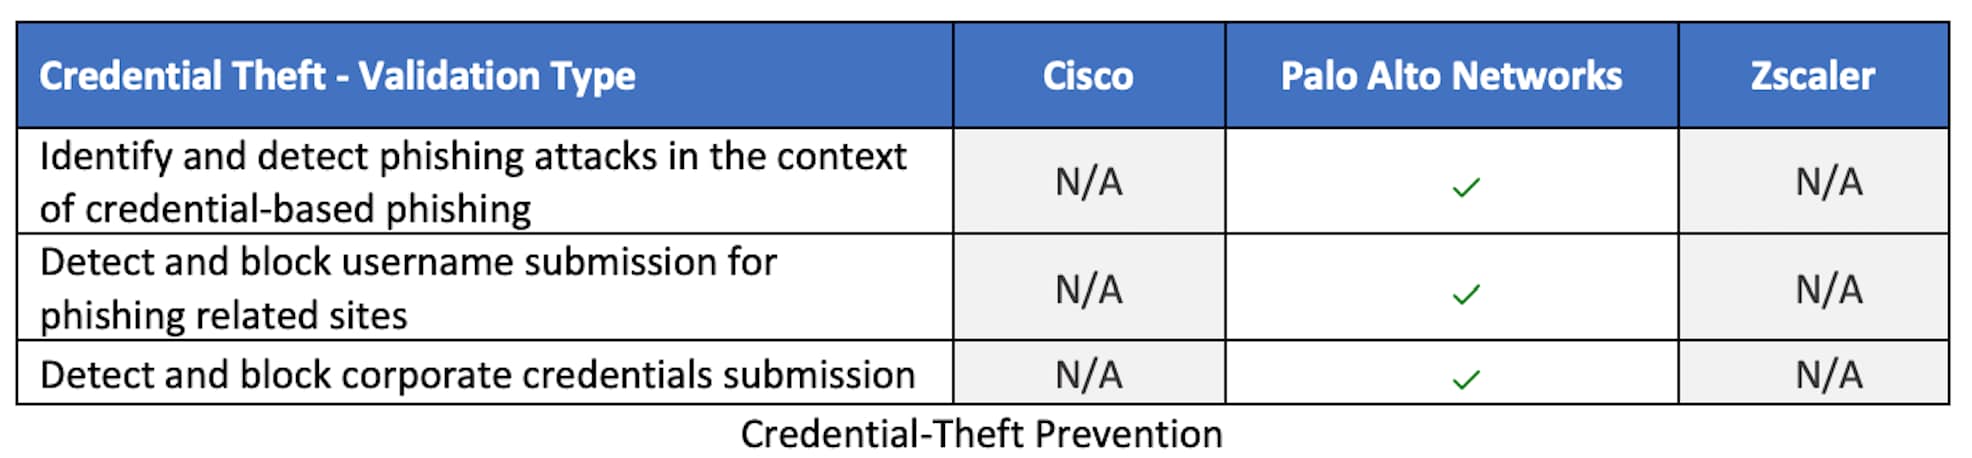 Credential-Theft Prevention